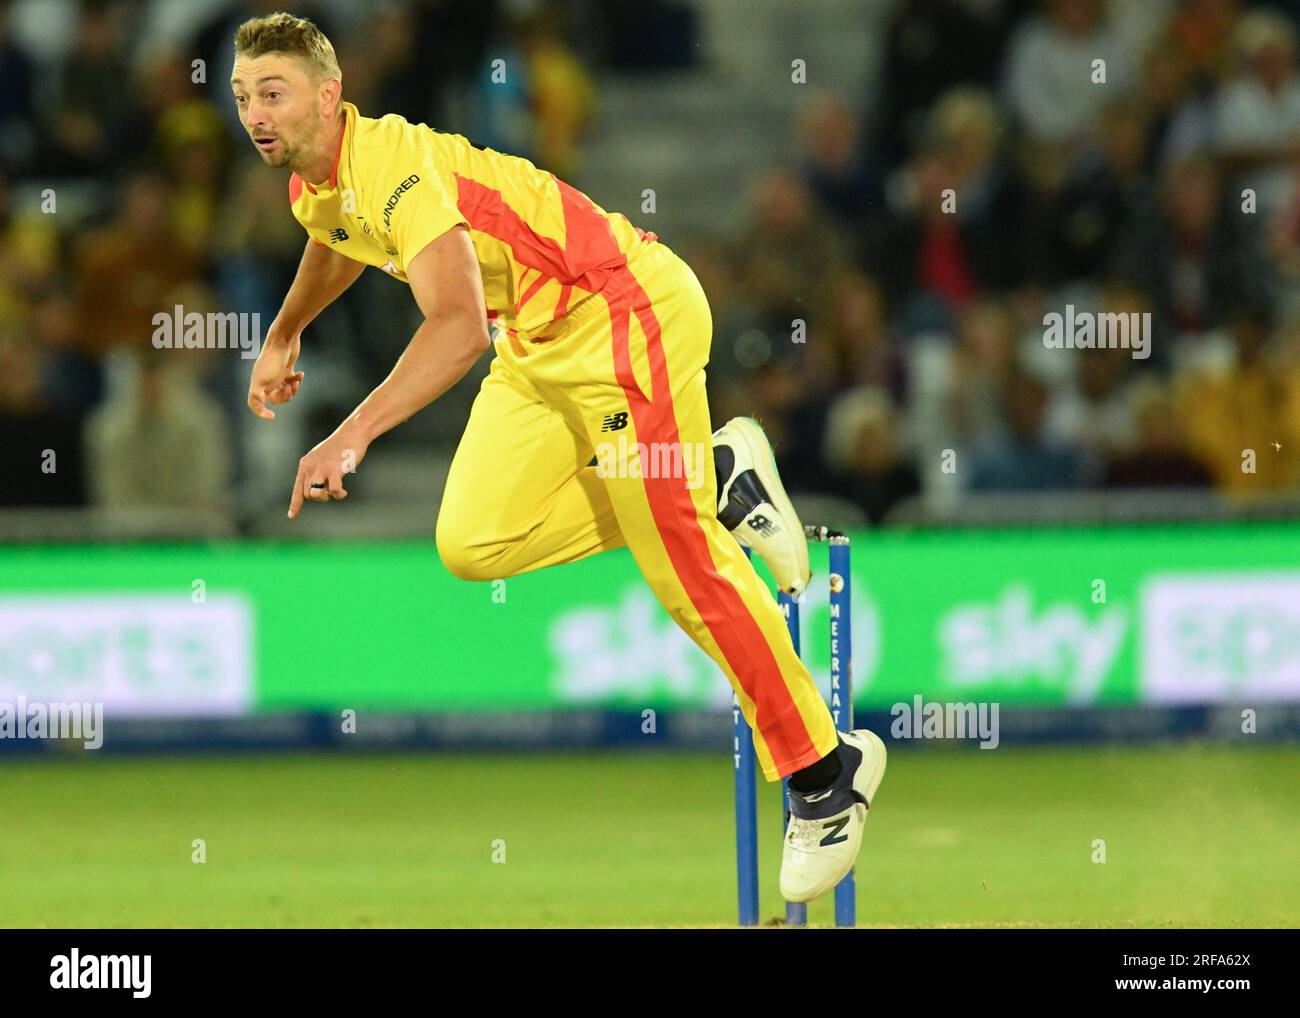 01 August 2023 - Trent Bridge Cricket Ground, Nottingham.  Event: The 100 Double Header (Mens and Women’s): Trent Rockets v Southern Brave.  Caption: Daniel Sams (Trent Rockets) bowls and seals a win for Trent Rockets.  Picture: Mark Dunn/Alamy Live News (Sports) Stock Photo